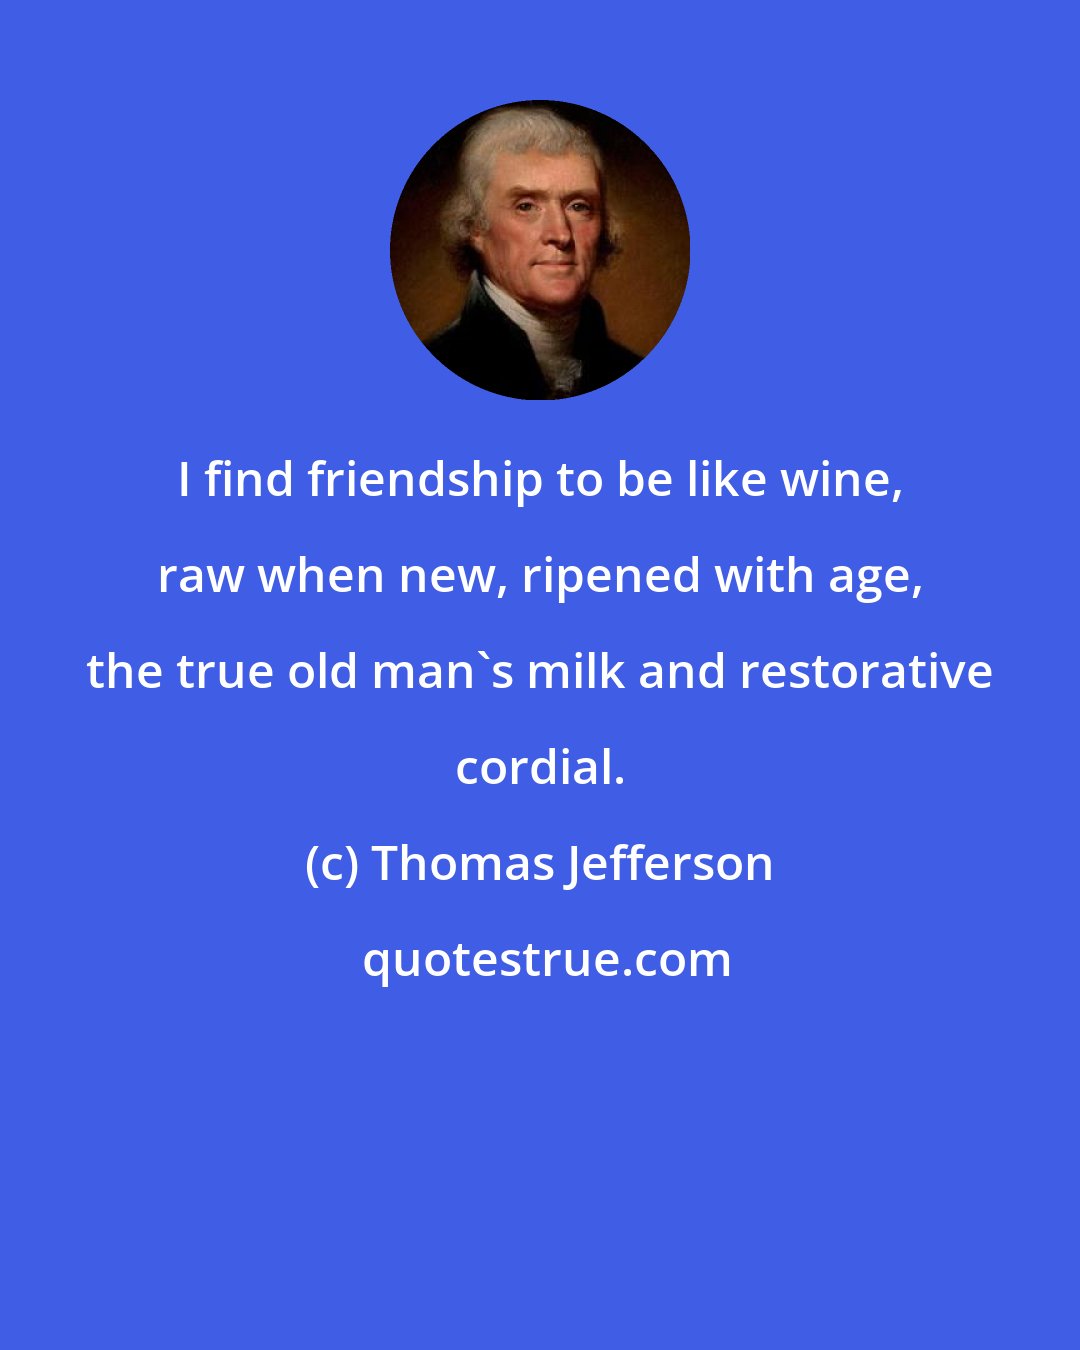 Thomas Jefferson: I find friendship to be like wine, raw when new, ripened with age, the true old man's milk and restorative cordial.